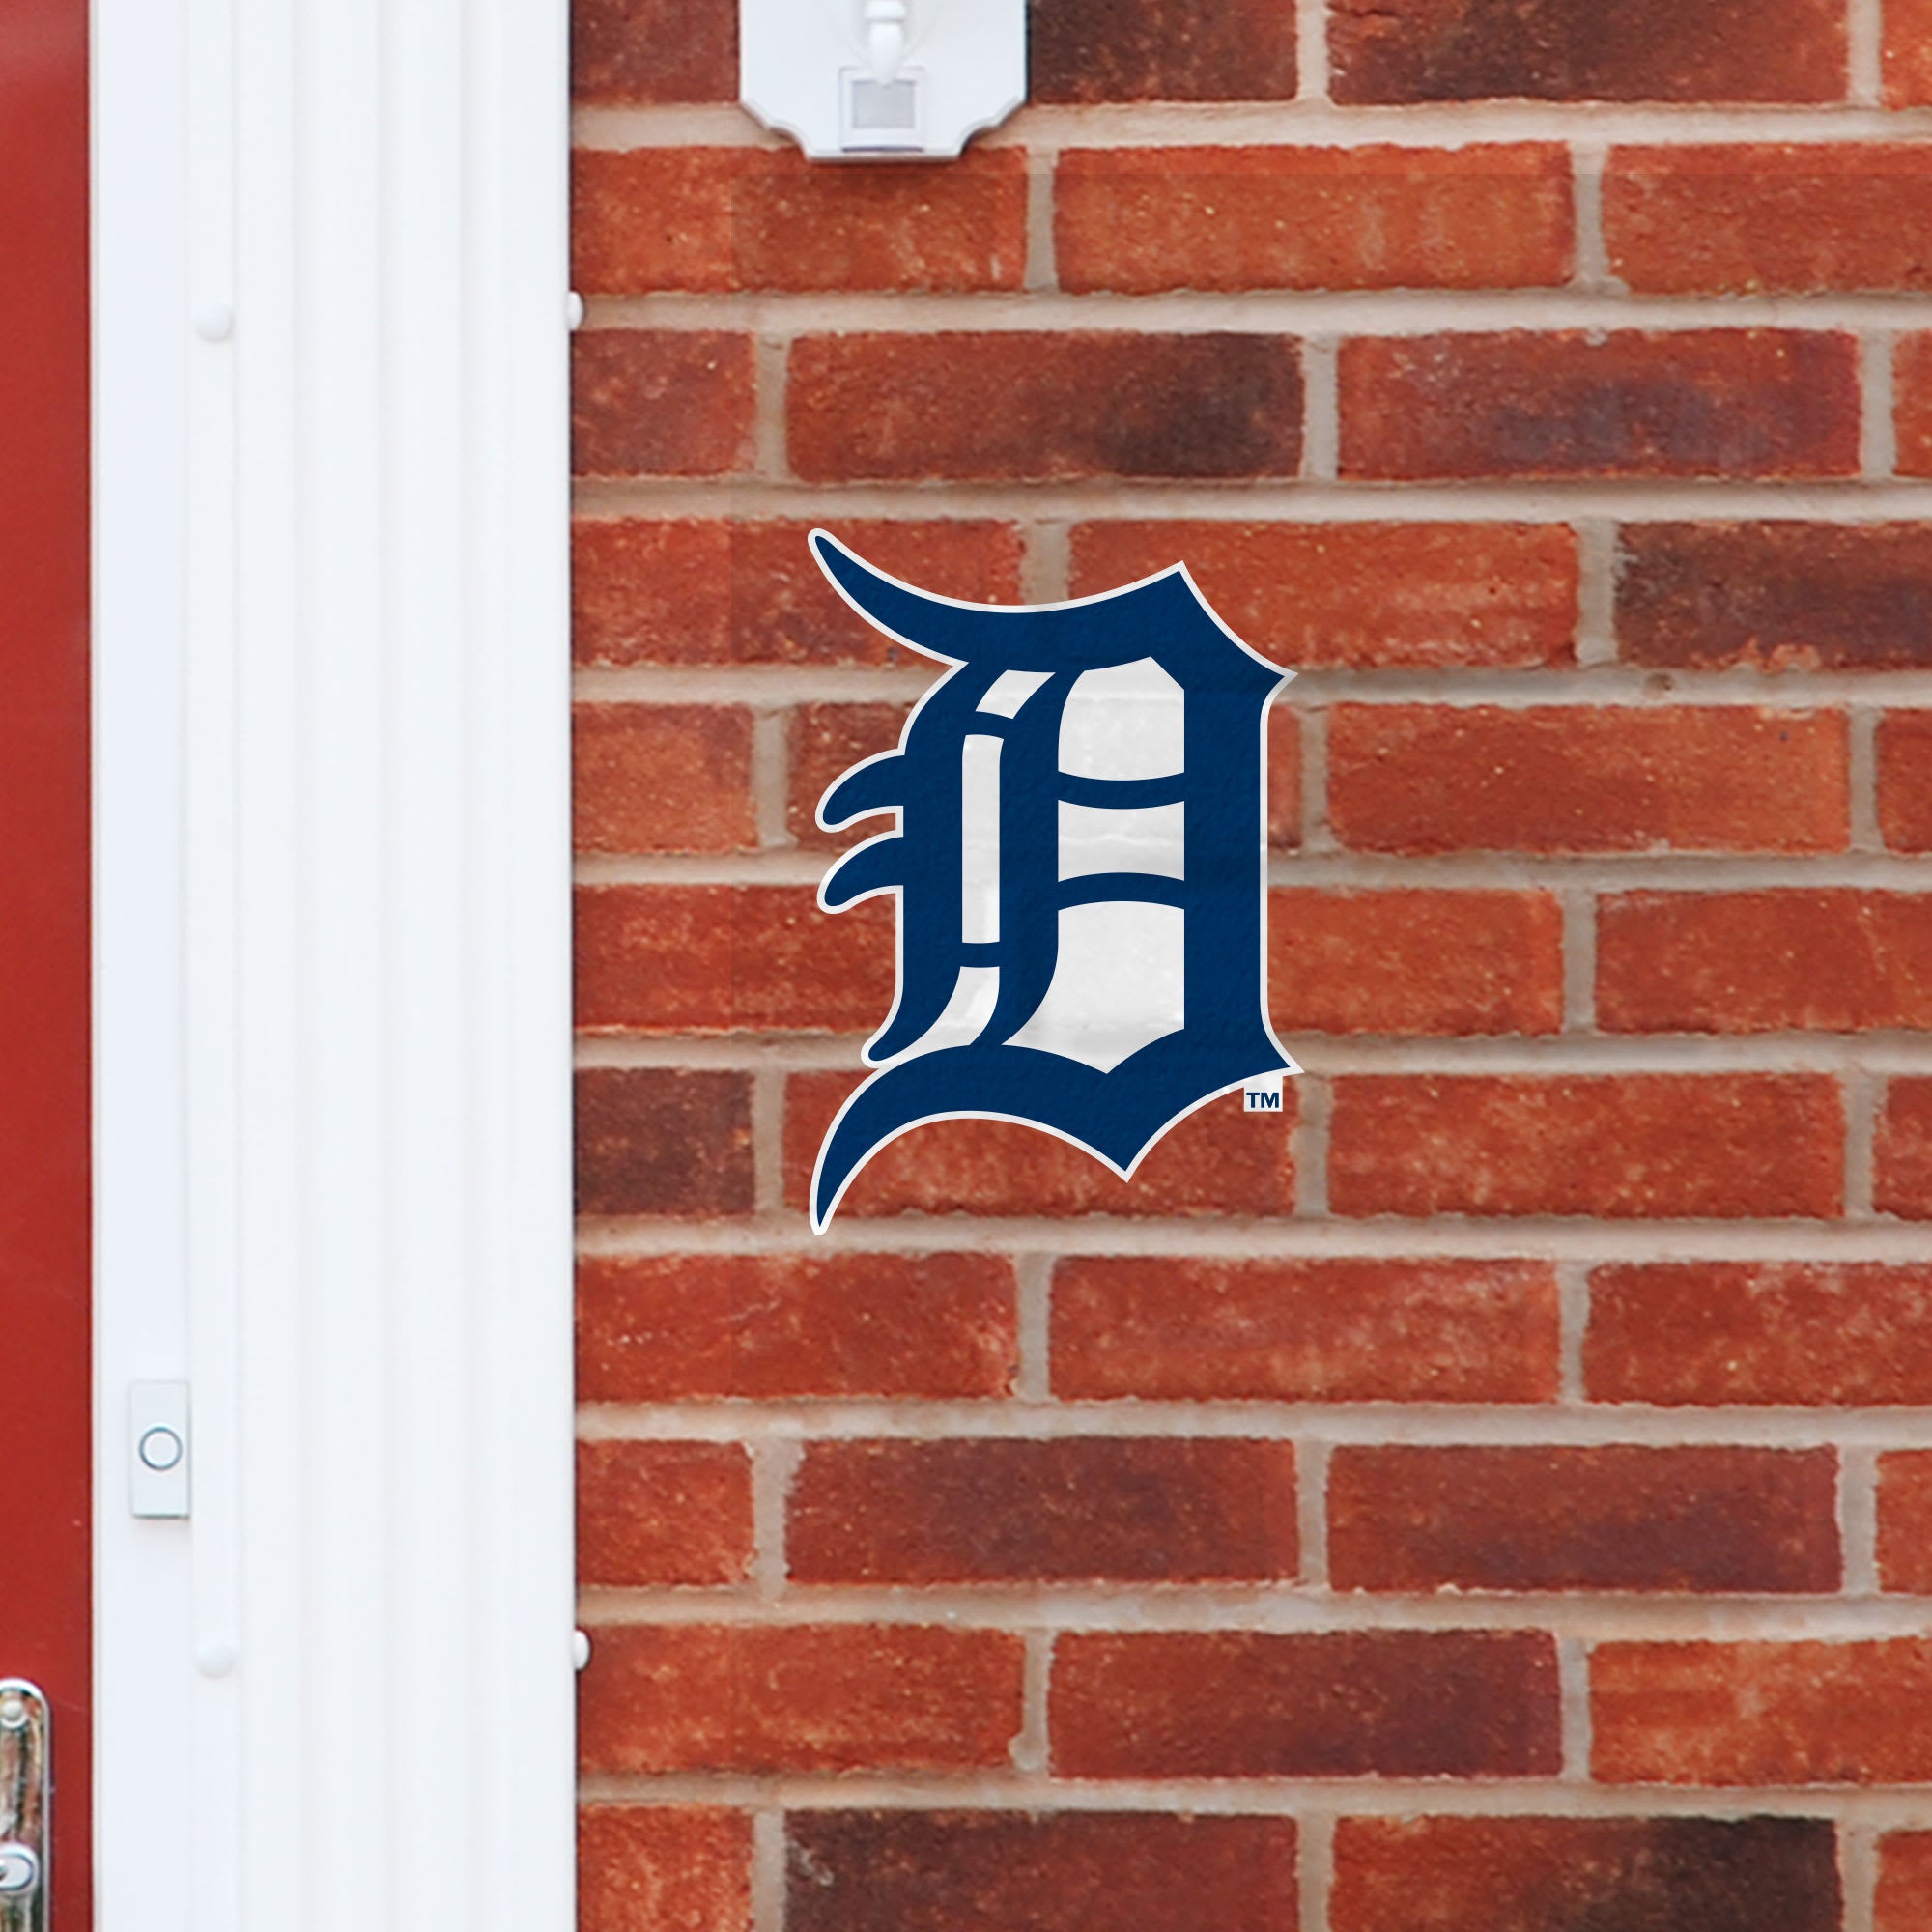 Detroit Tigers: Logo - Officially Licensed MLB Outdoor Graphic Large by Fathead | Wood/Aluminum